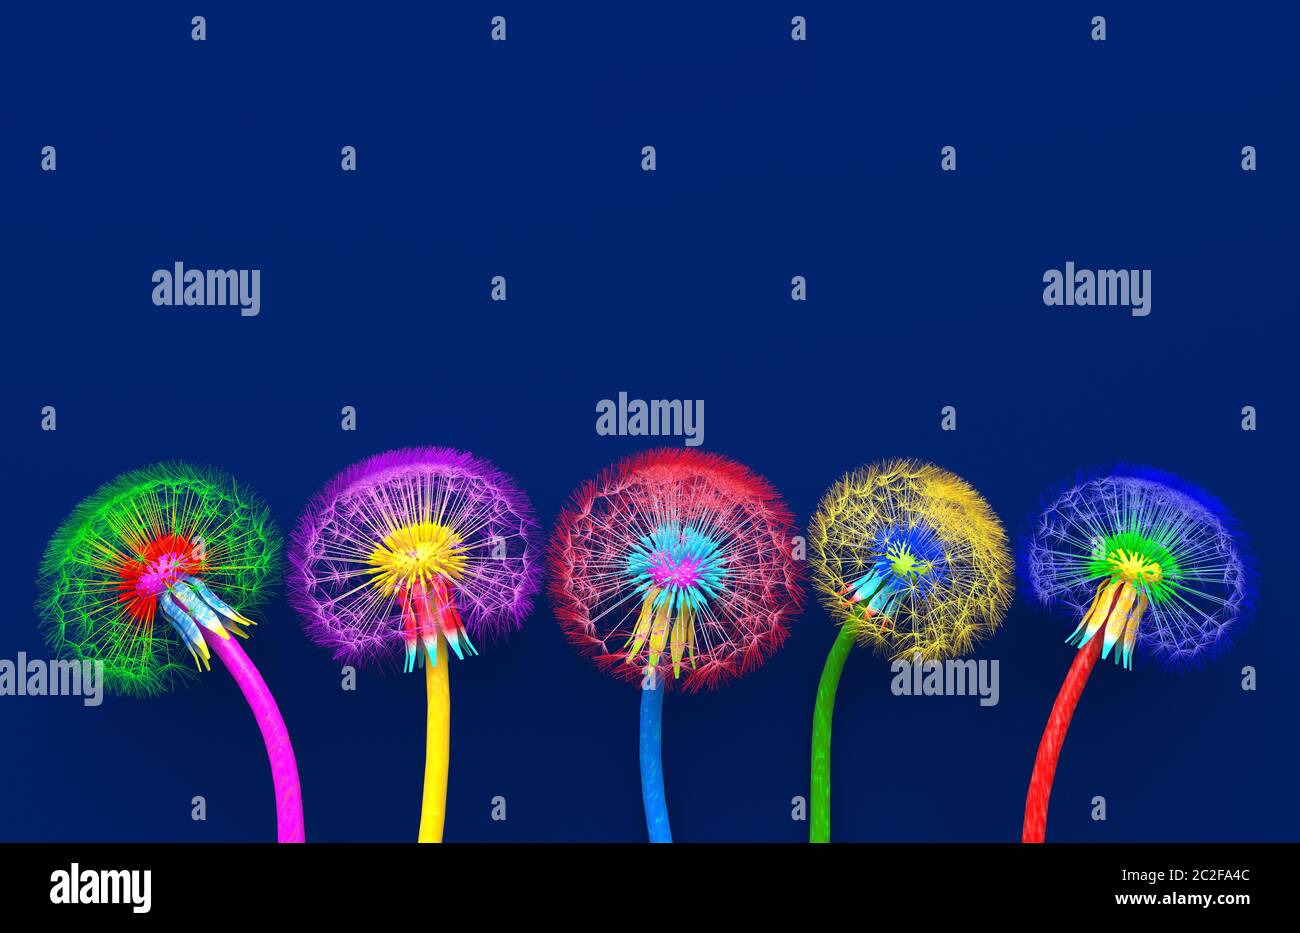 Bouquet of five flowers of blossoming dandelions of unusual colorful colors. Bright multi-colored abstract dandelions on a blue background. Creative c Stock Photo